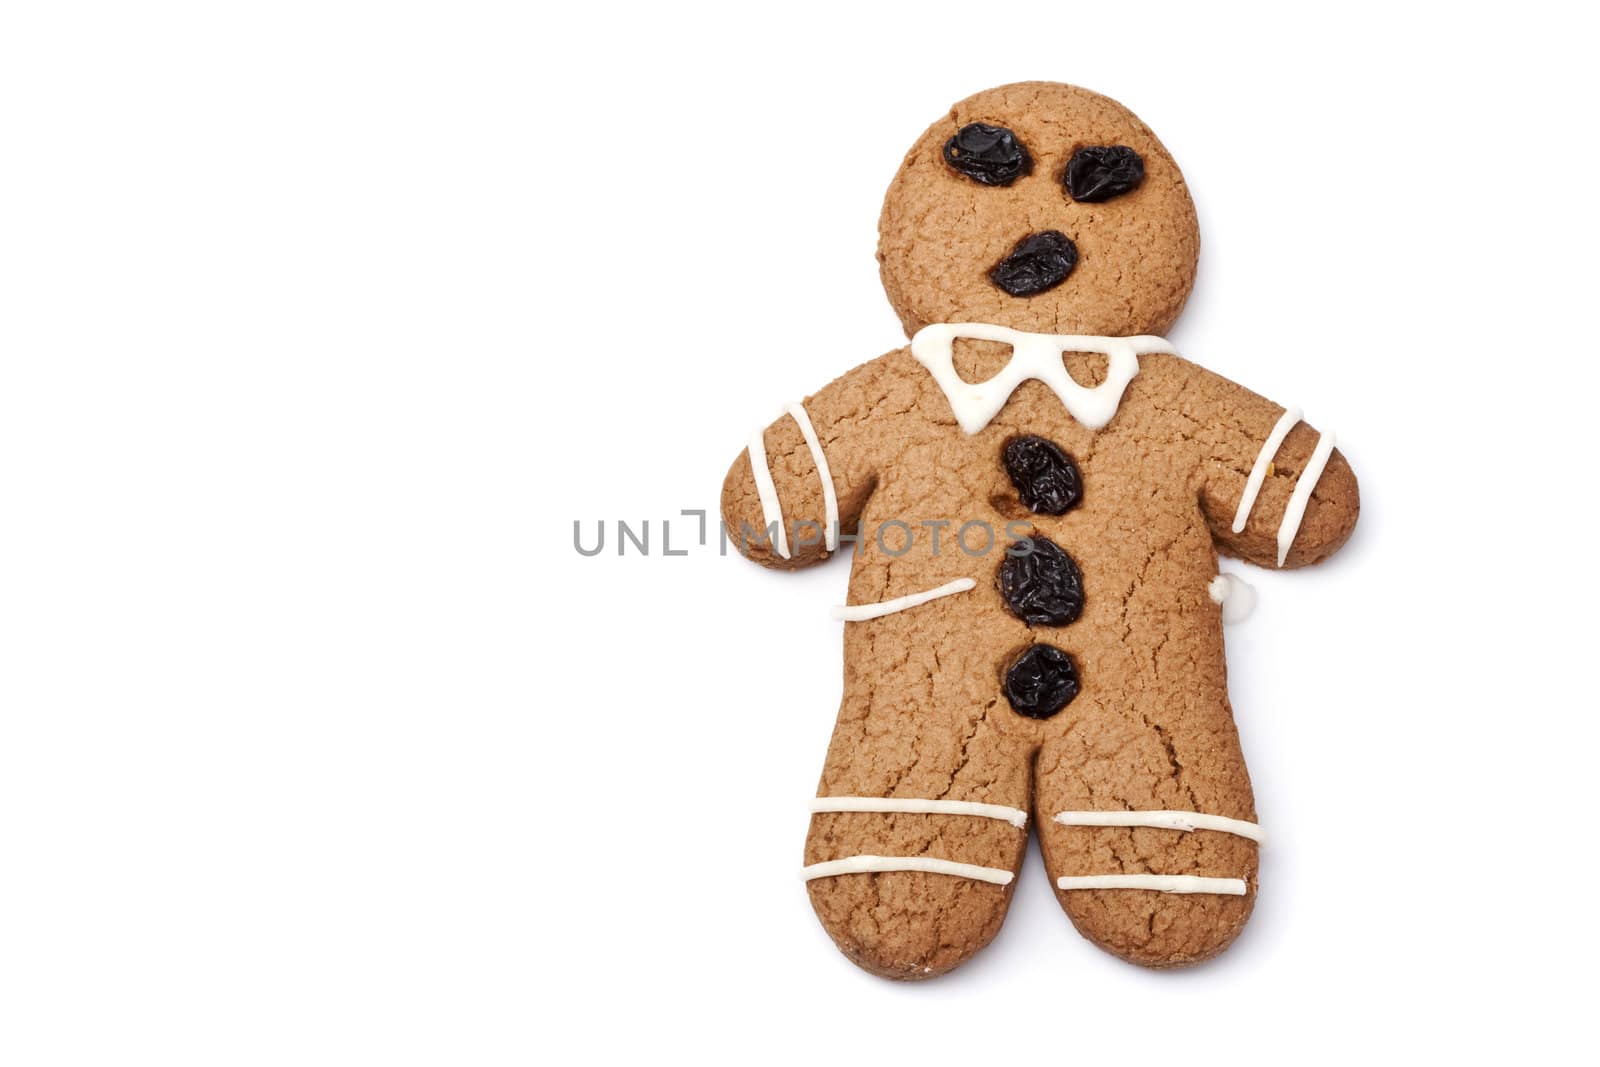 Gingerbread man on white background with copy space.